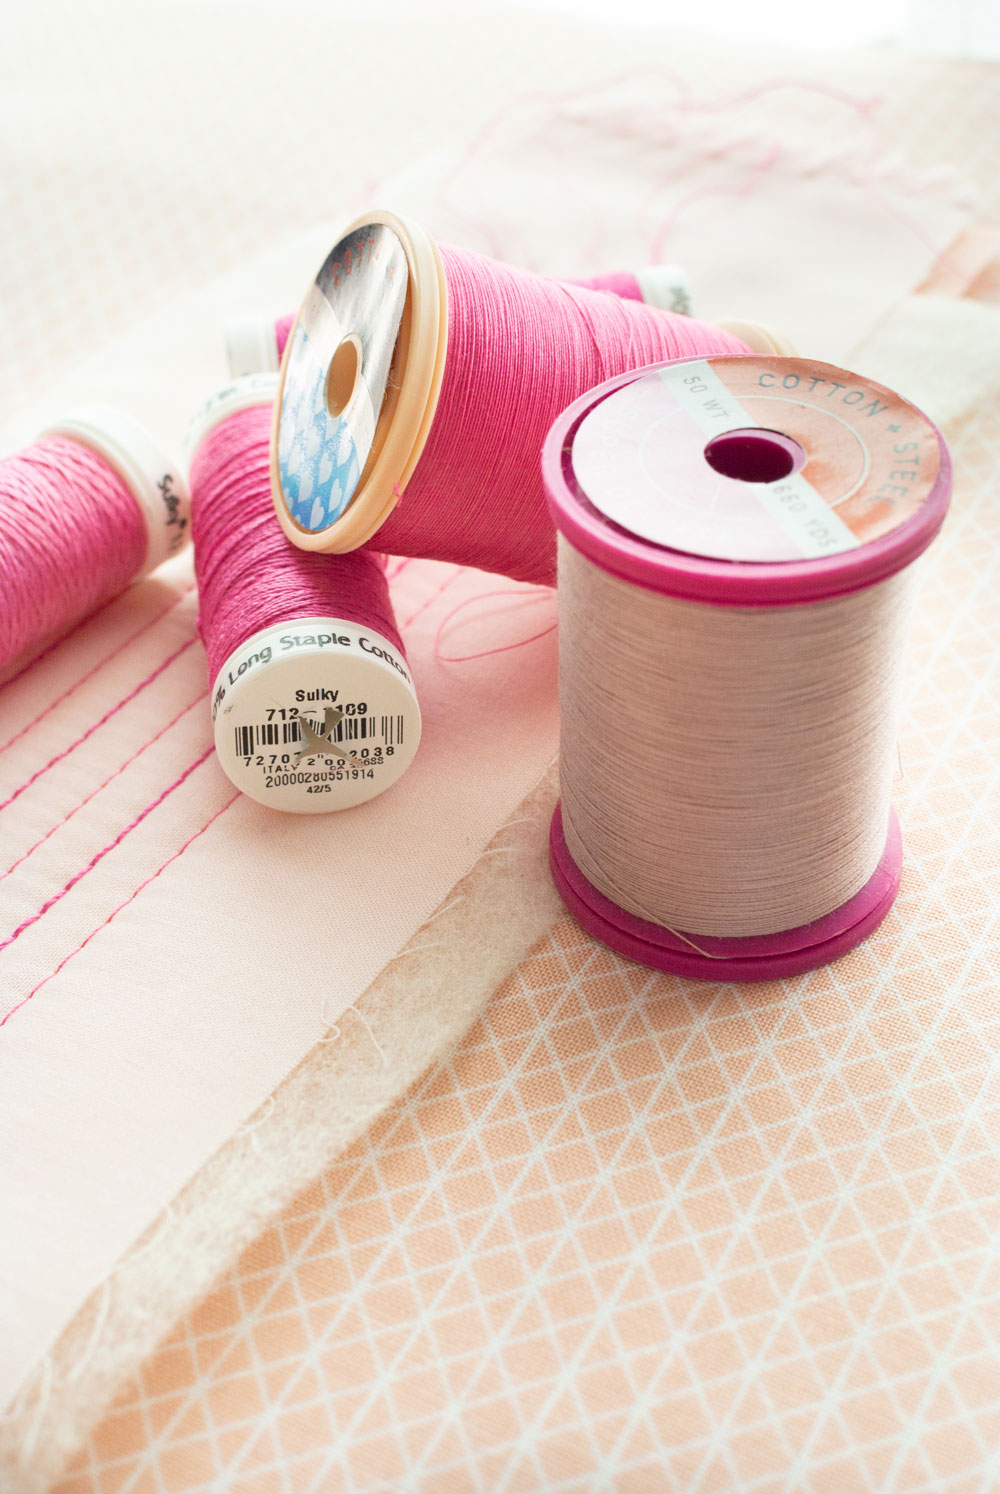 This blog post covers all of the supplies you need for machine quilting with 12 weight thread.